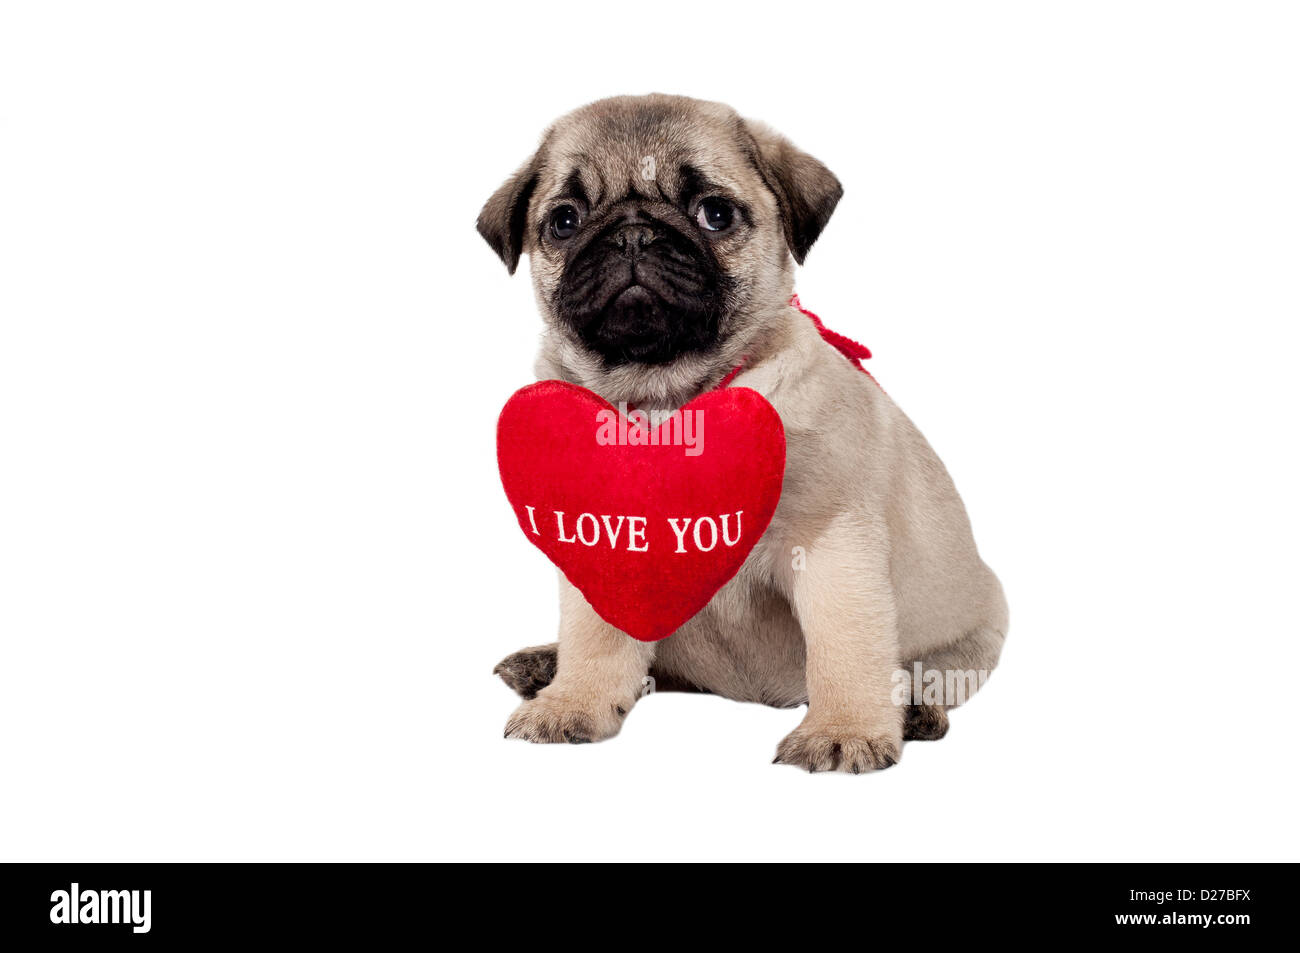 Cute little pug puppy with sign 'I Love You' Stock Photo